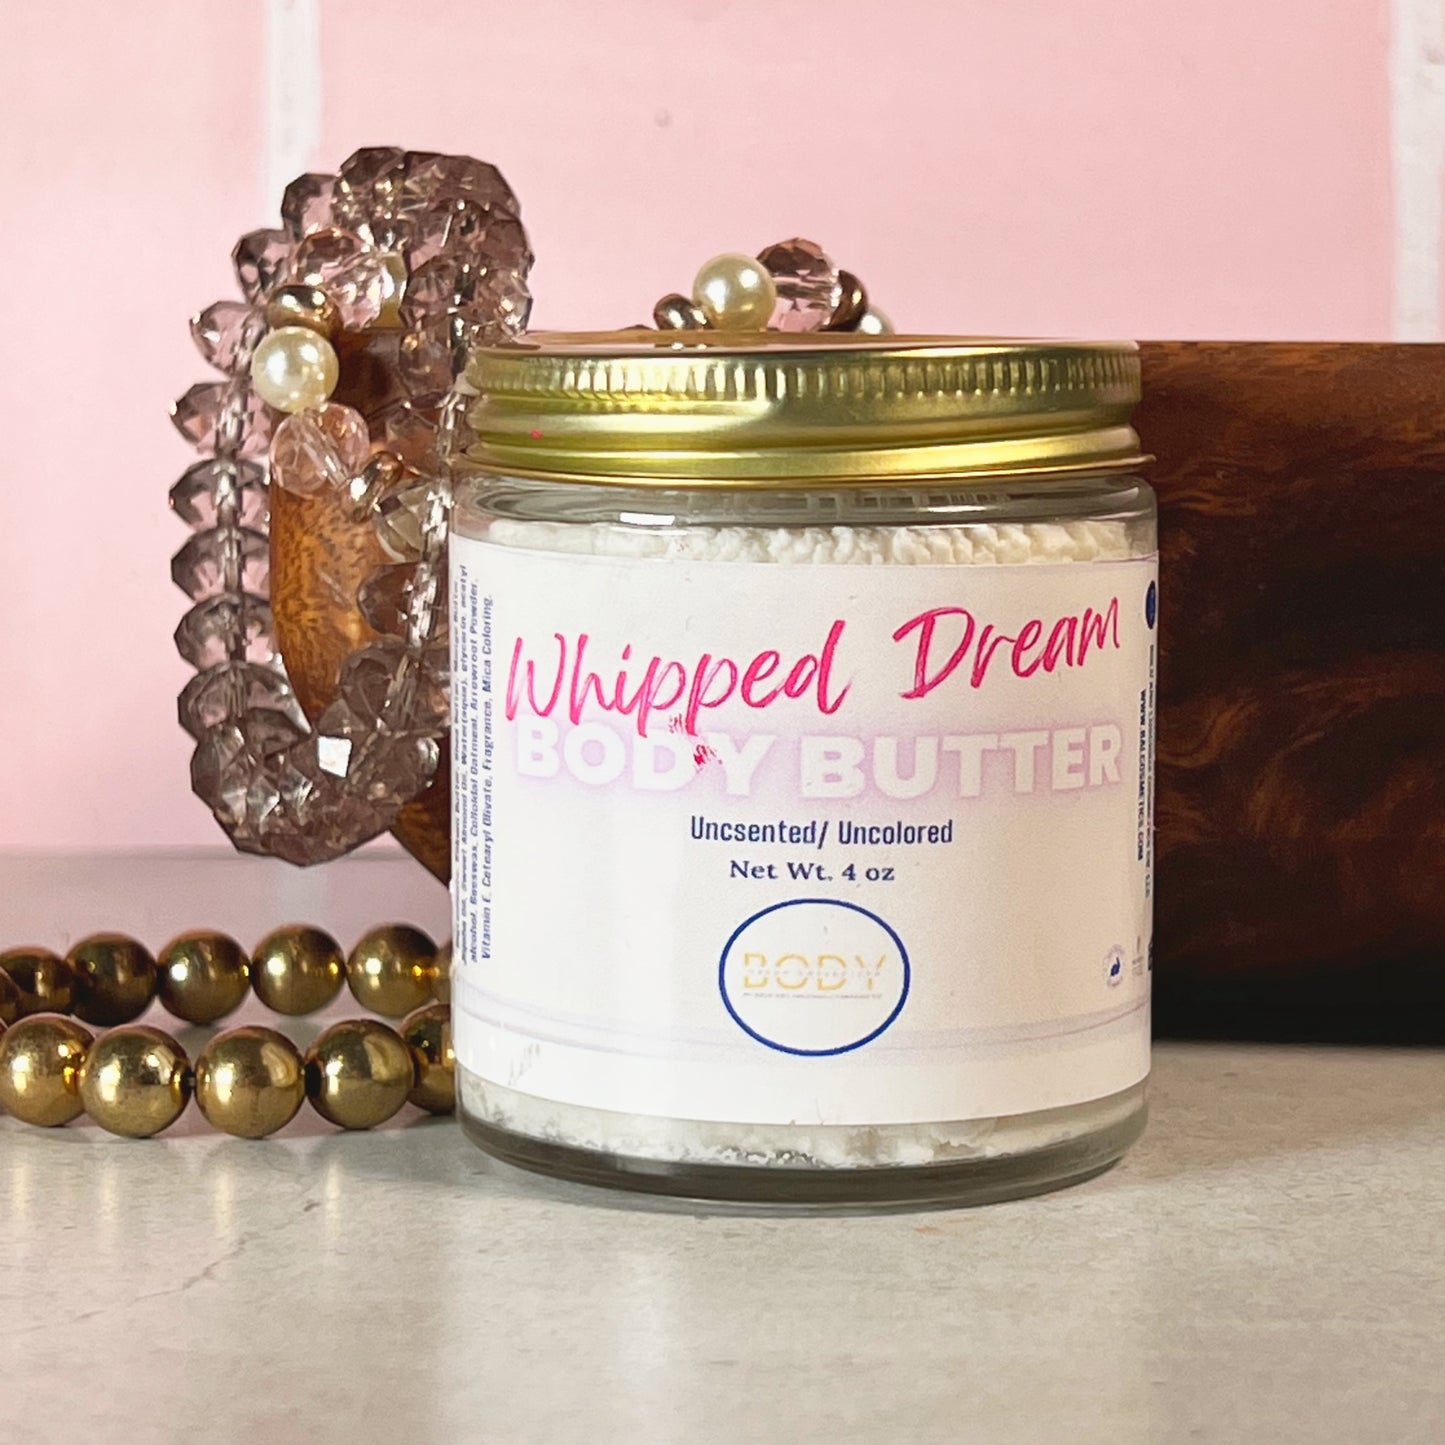 Unscented Whipped Body Butter, Nude